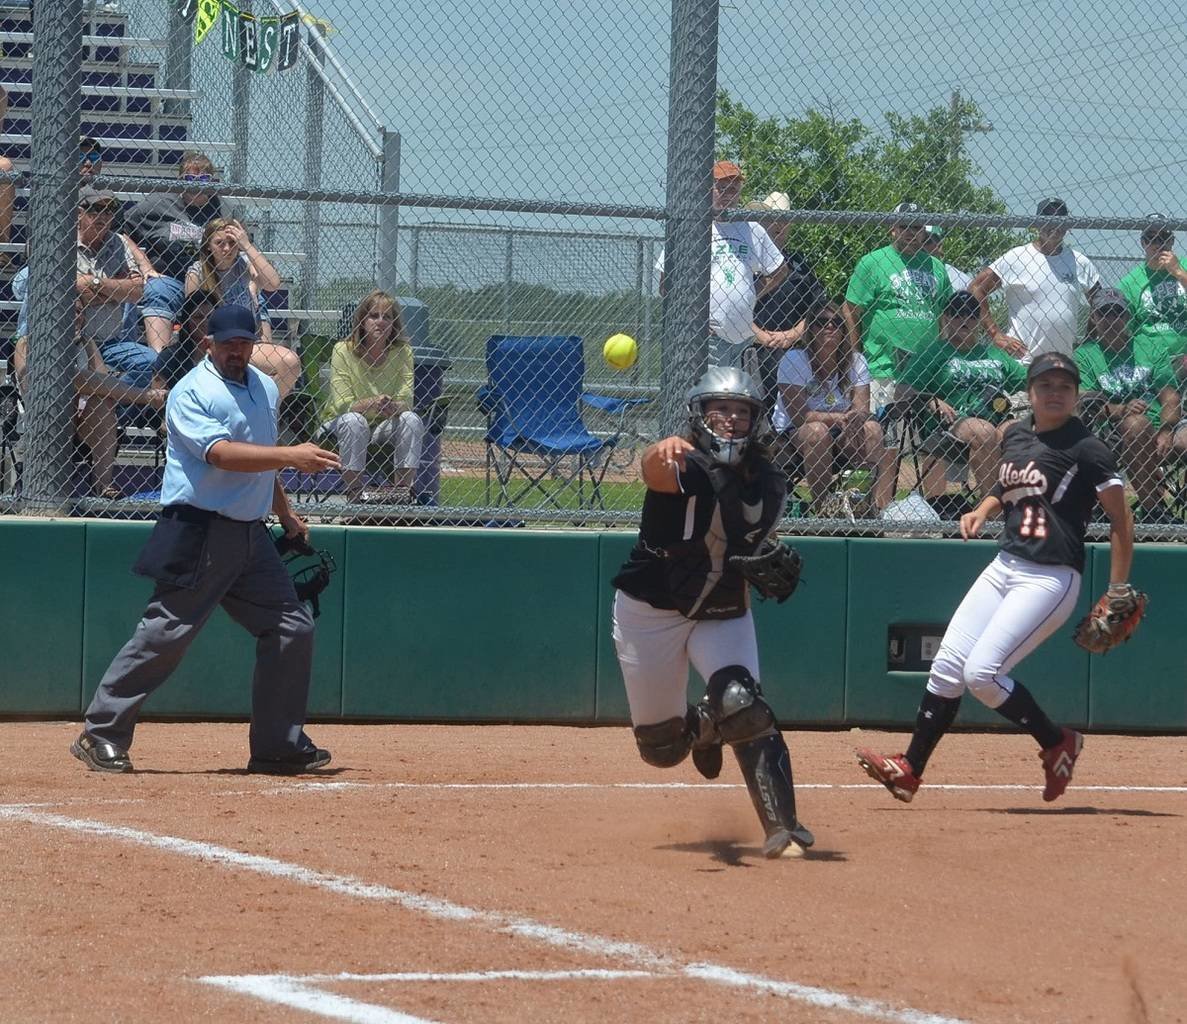 Aledo senior catcher Landri Mays throws to first base during the Ladycats' win over Azle. The Ladycats and Bearcats will continue playoff action beginning Thursday. The Ladycats will face Birdville in a best-of-3 regional quarterfinal series, while the Bearcats will play Wichita Falls Rider in a best-of-3 area series.